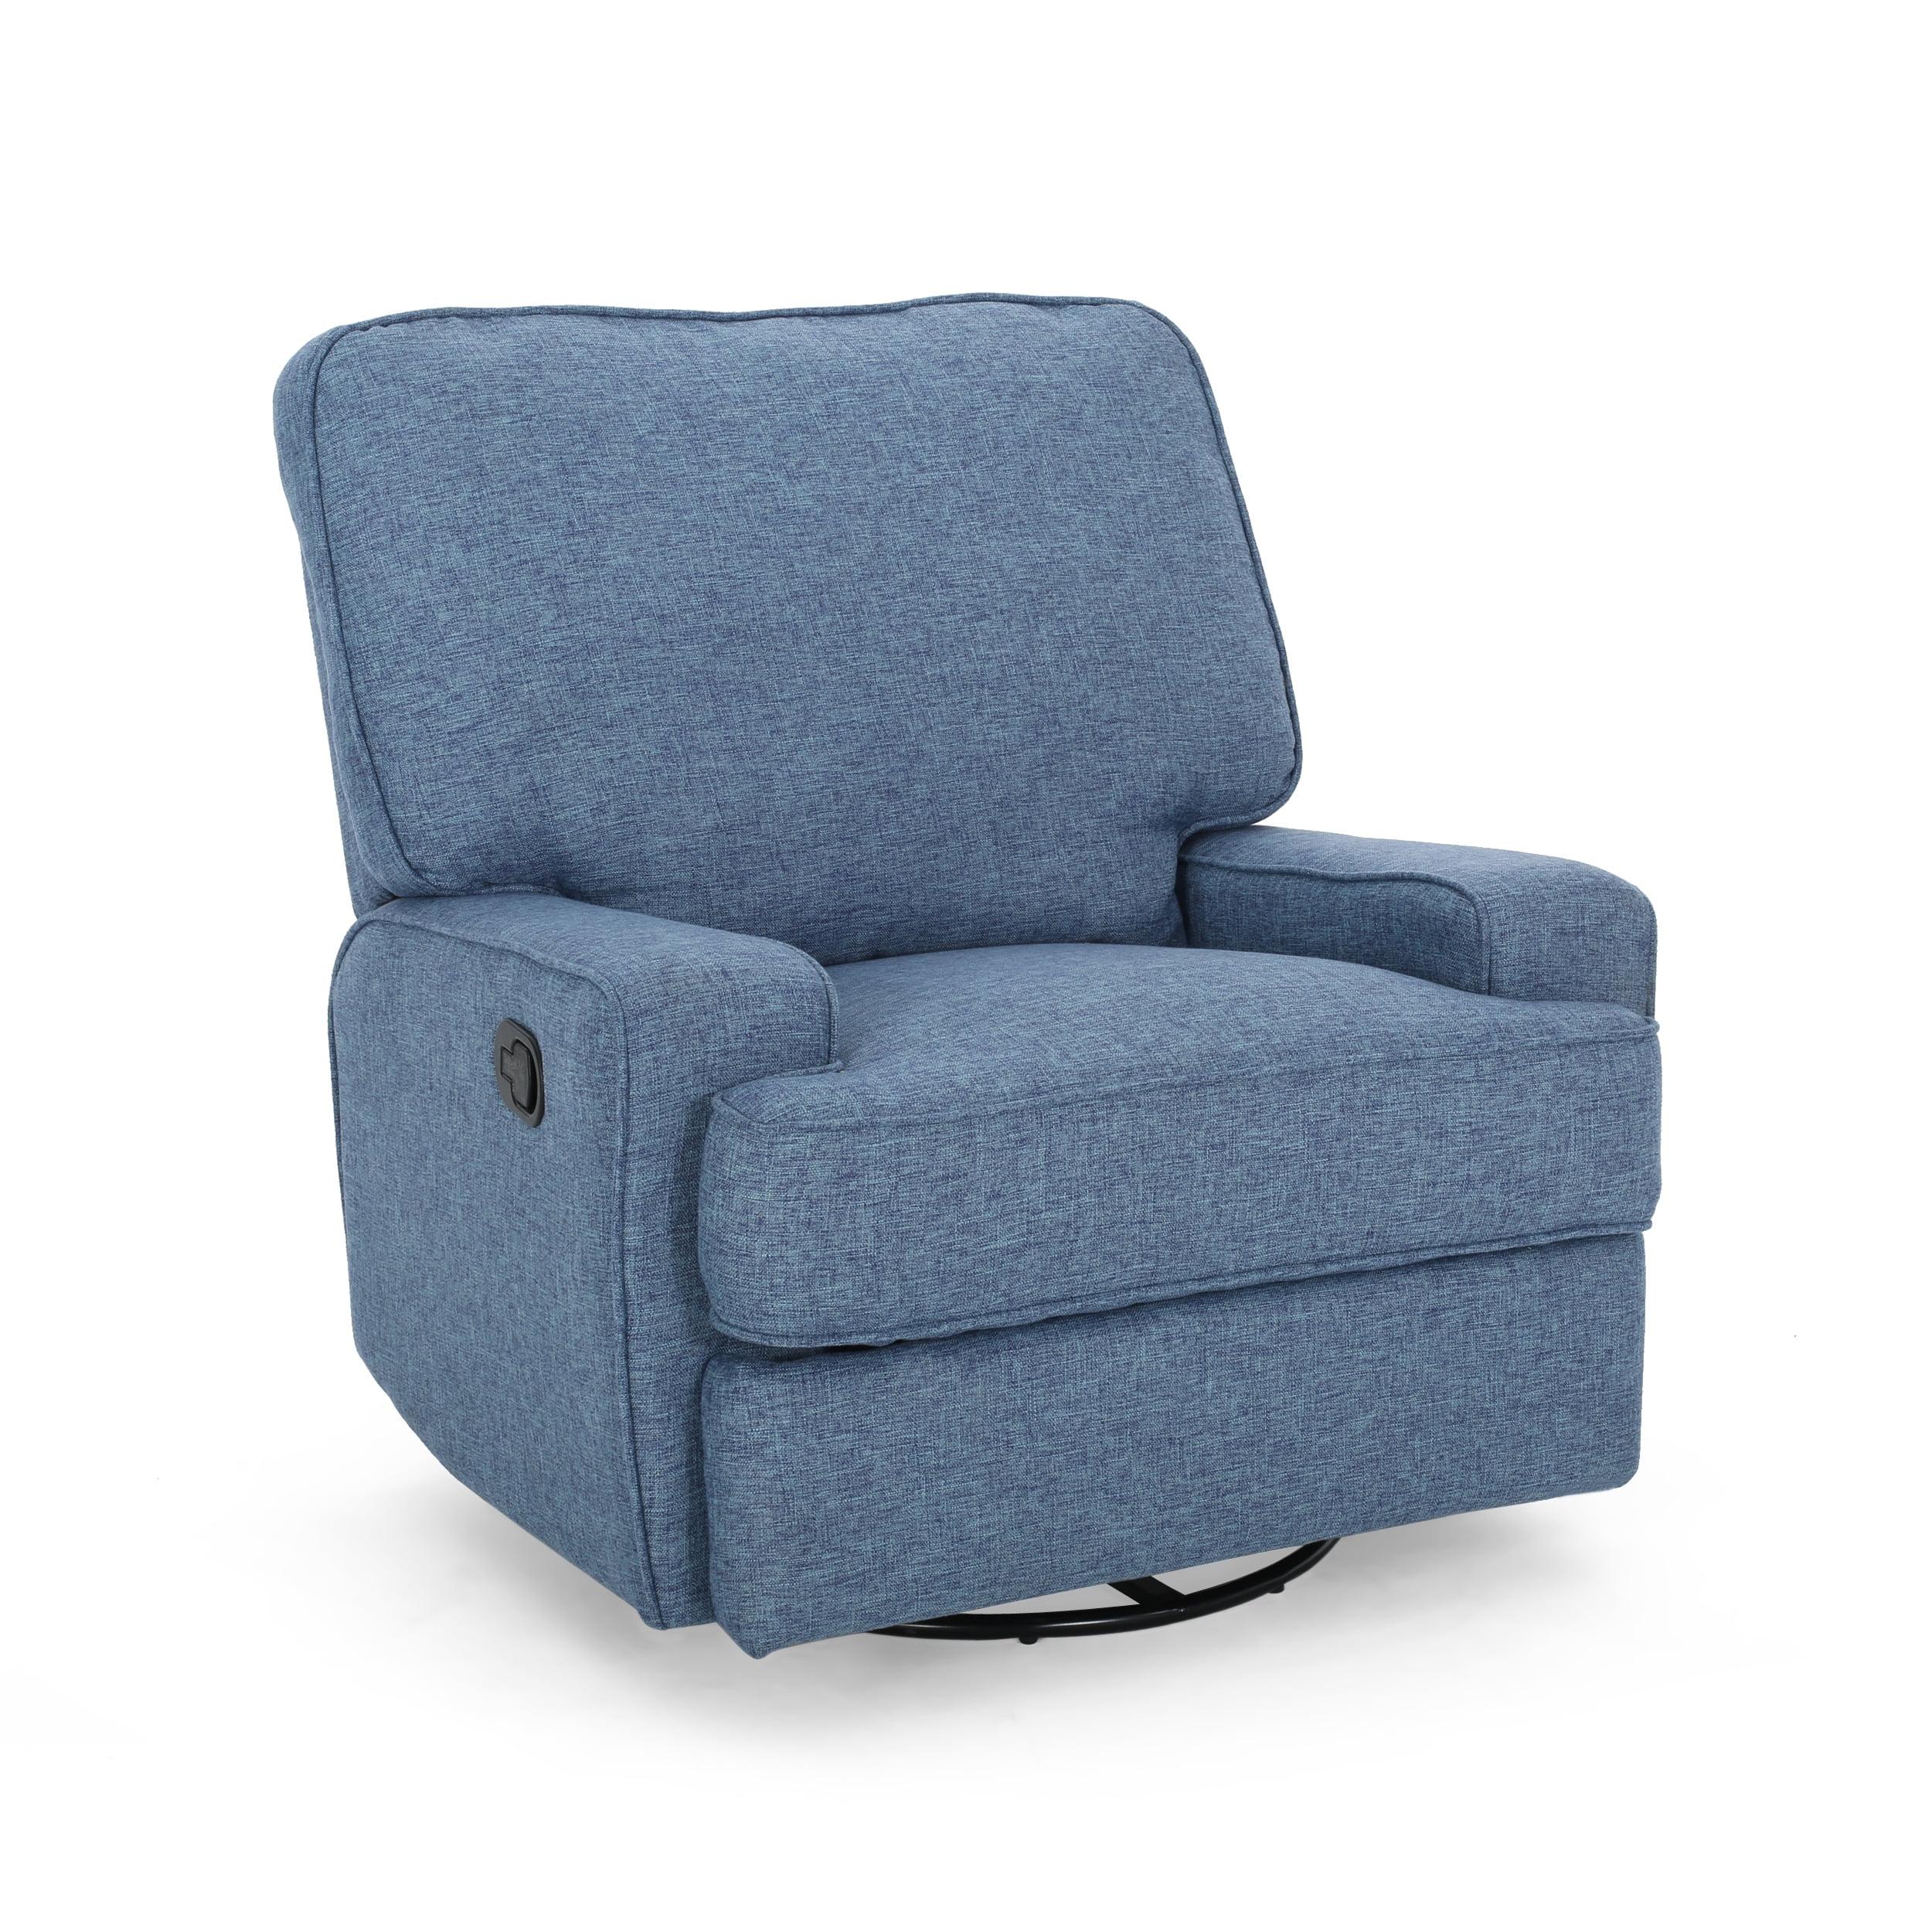 Handcrafted Navy Blue Fabric Swivel Glider Club Recliner